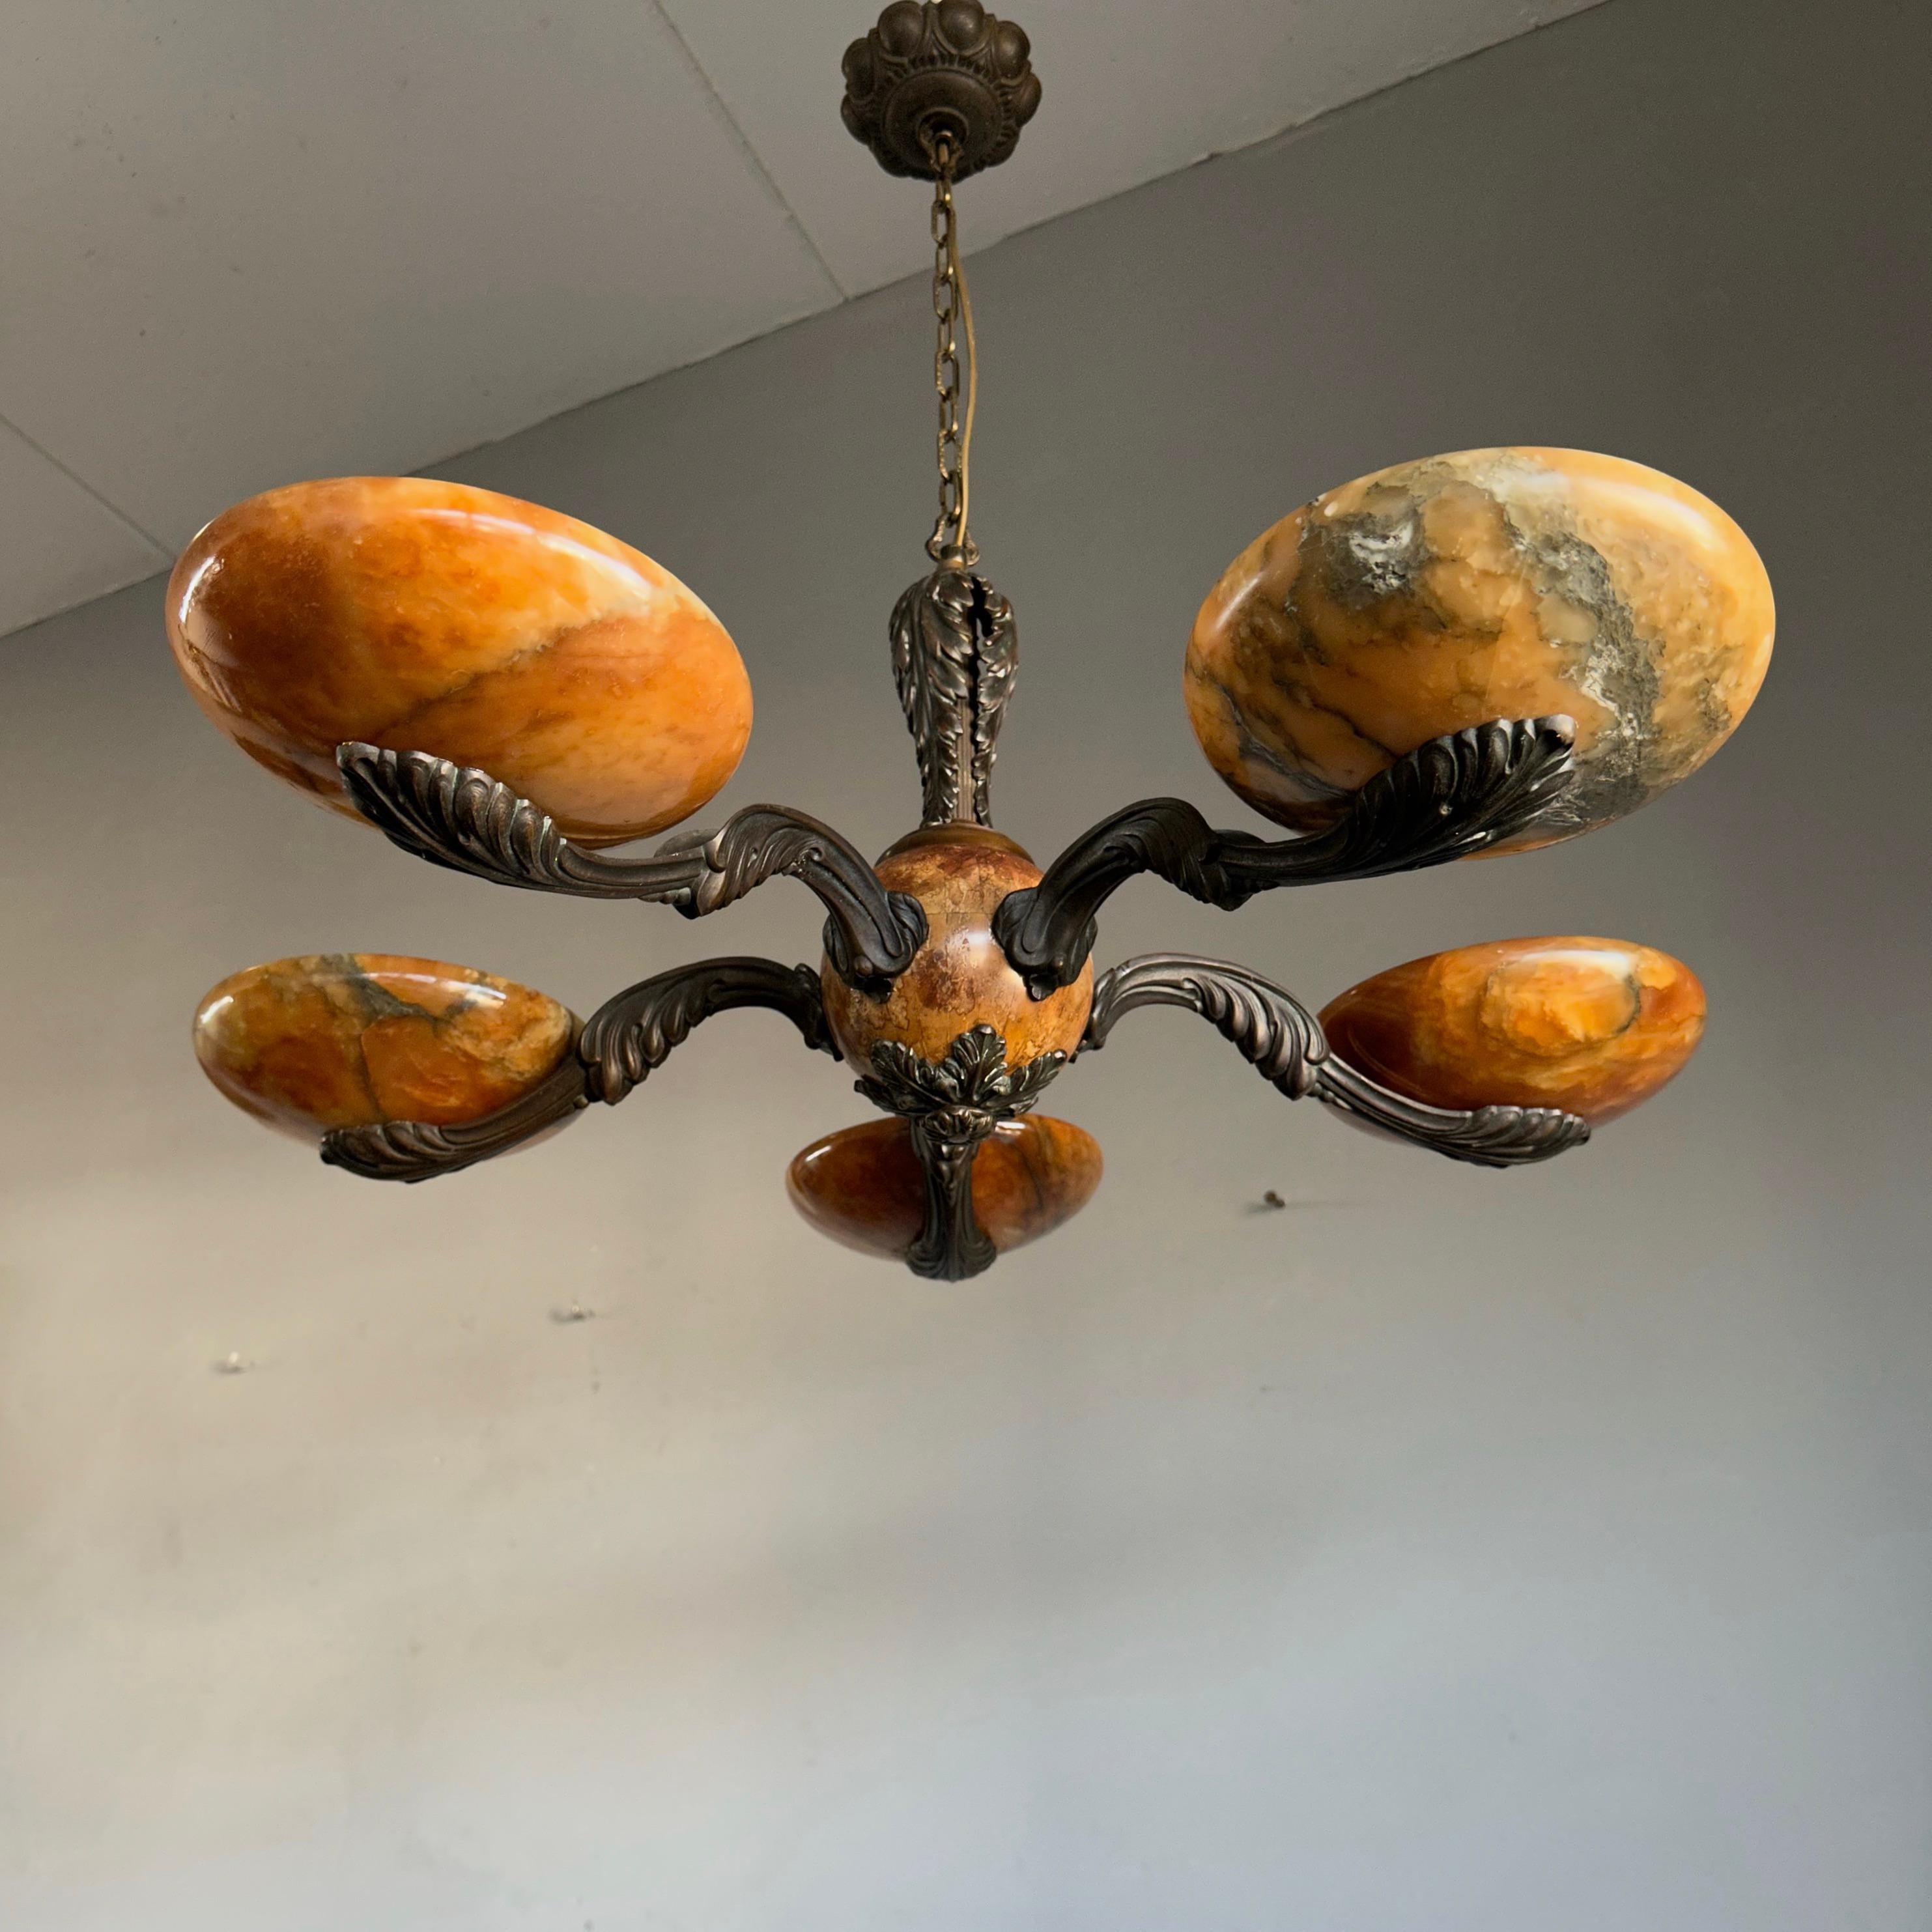 Unique, elegant and well balanced pendant light.

If you are looking for an antique and classy light fixture to grace your living space then this stunning light from the European Arts and Crafts era could be your to own and enjoy soon. This